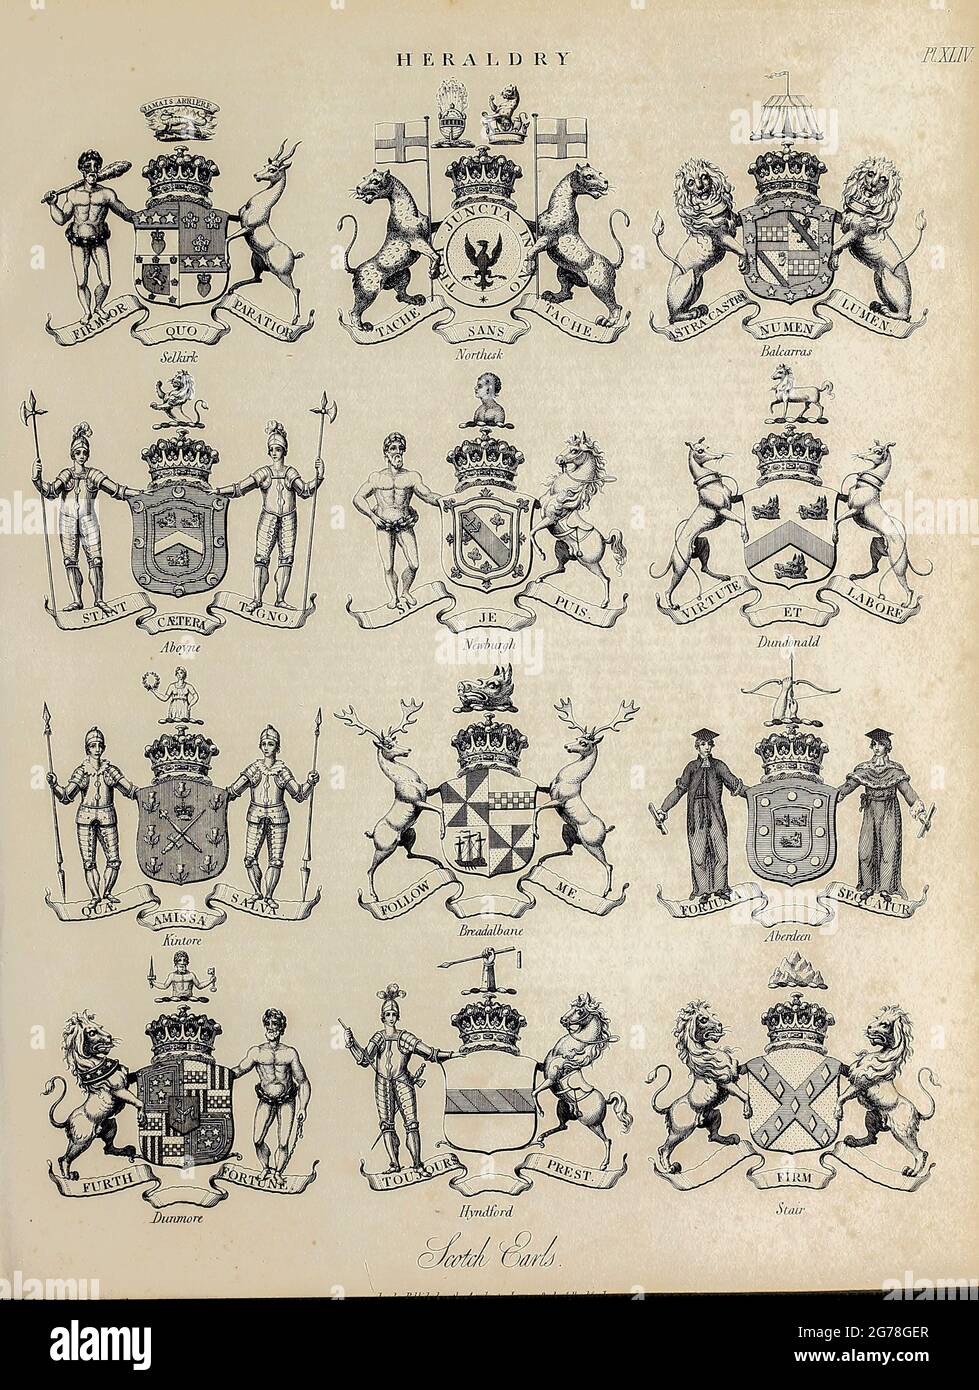 Royal armorial bearings Heraldry is a discipline relating to the design, display and study of armorial bearings (known as armory), as well as related disciplines, such as vexillology, together with the study of ceremony, rank and pedigree. Armory, the best-known branch of heraldry, concerns the design and transmission of the heraldic achievement. The achievement, or armorial bearings usually includes a coat of arms on a shield, helmet and crest, together with any accompanying devices, such as supporters, badges, heraldic banners and mottoes. Copperplate engraving From the Encyclopaedia Londine Stock Photo